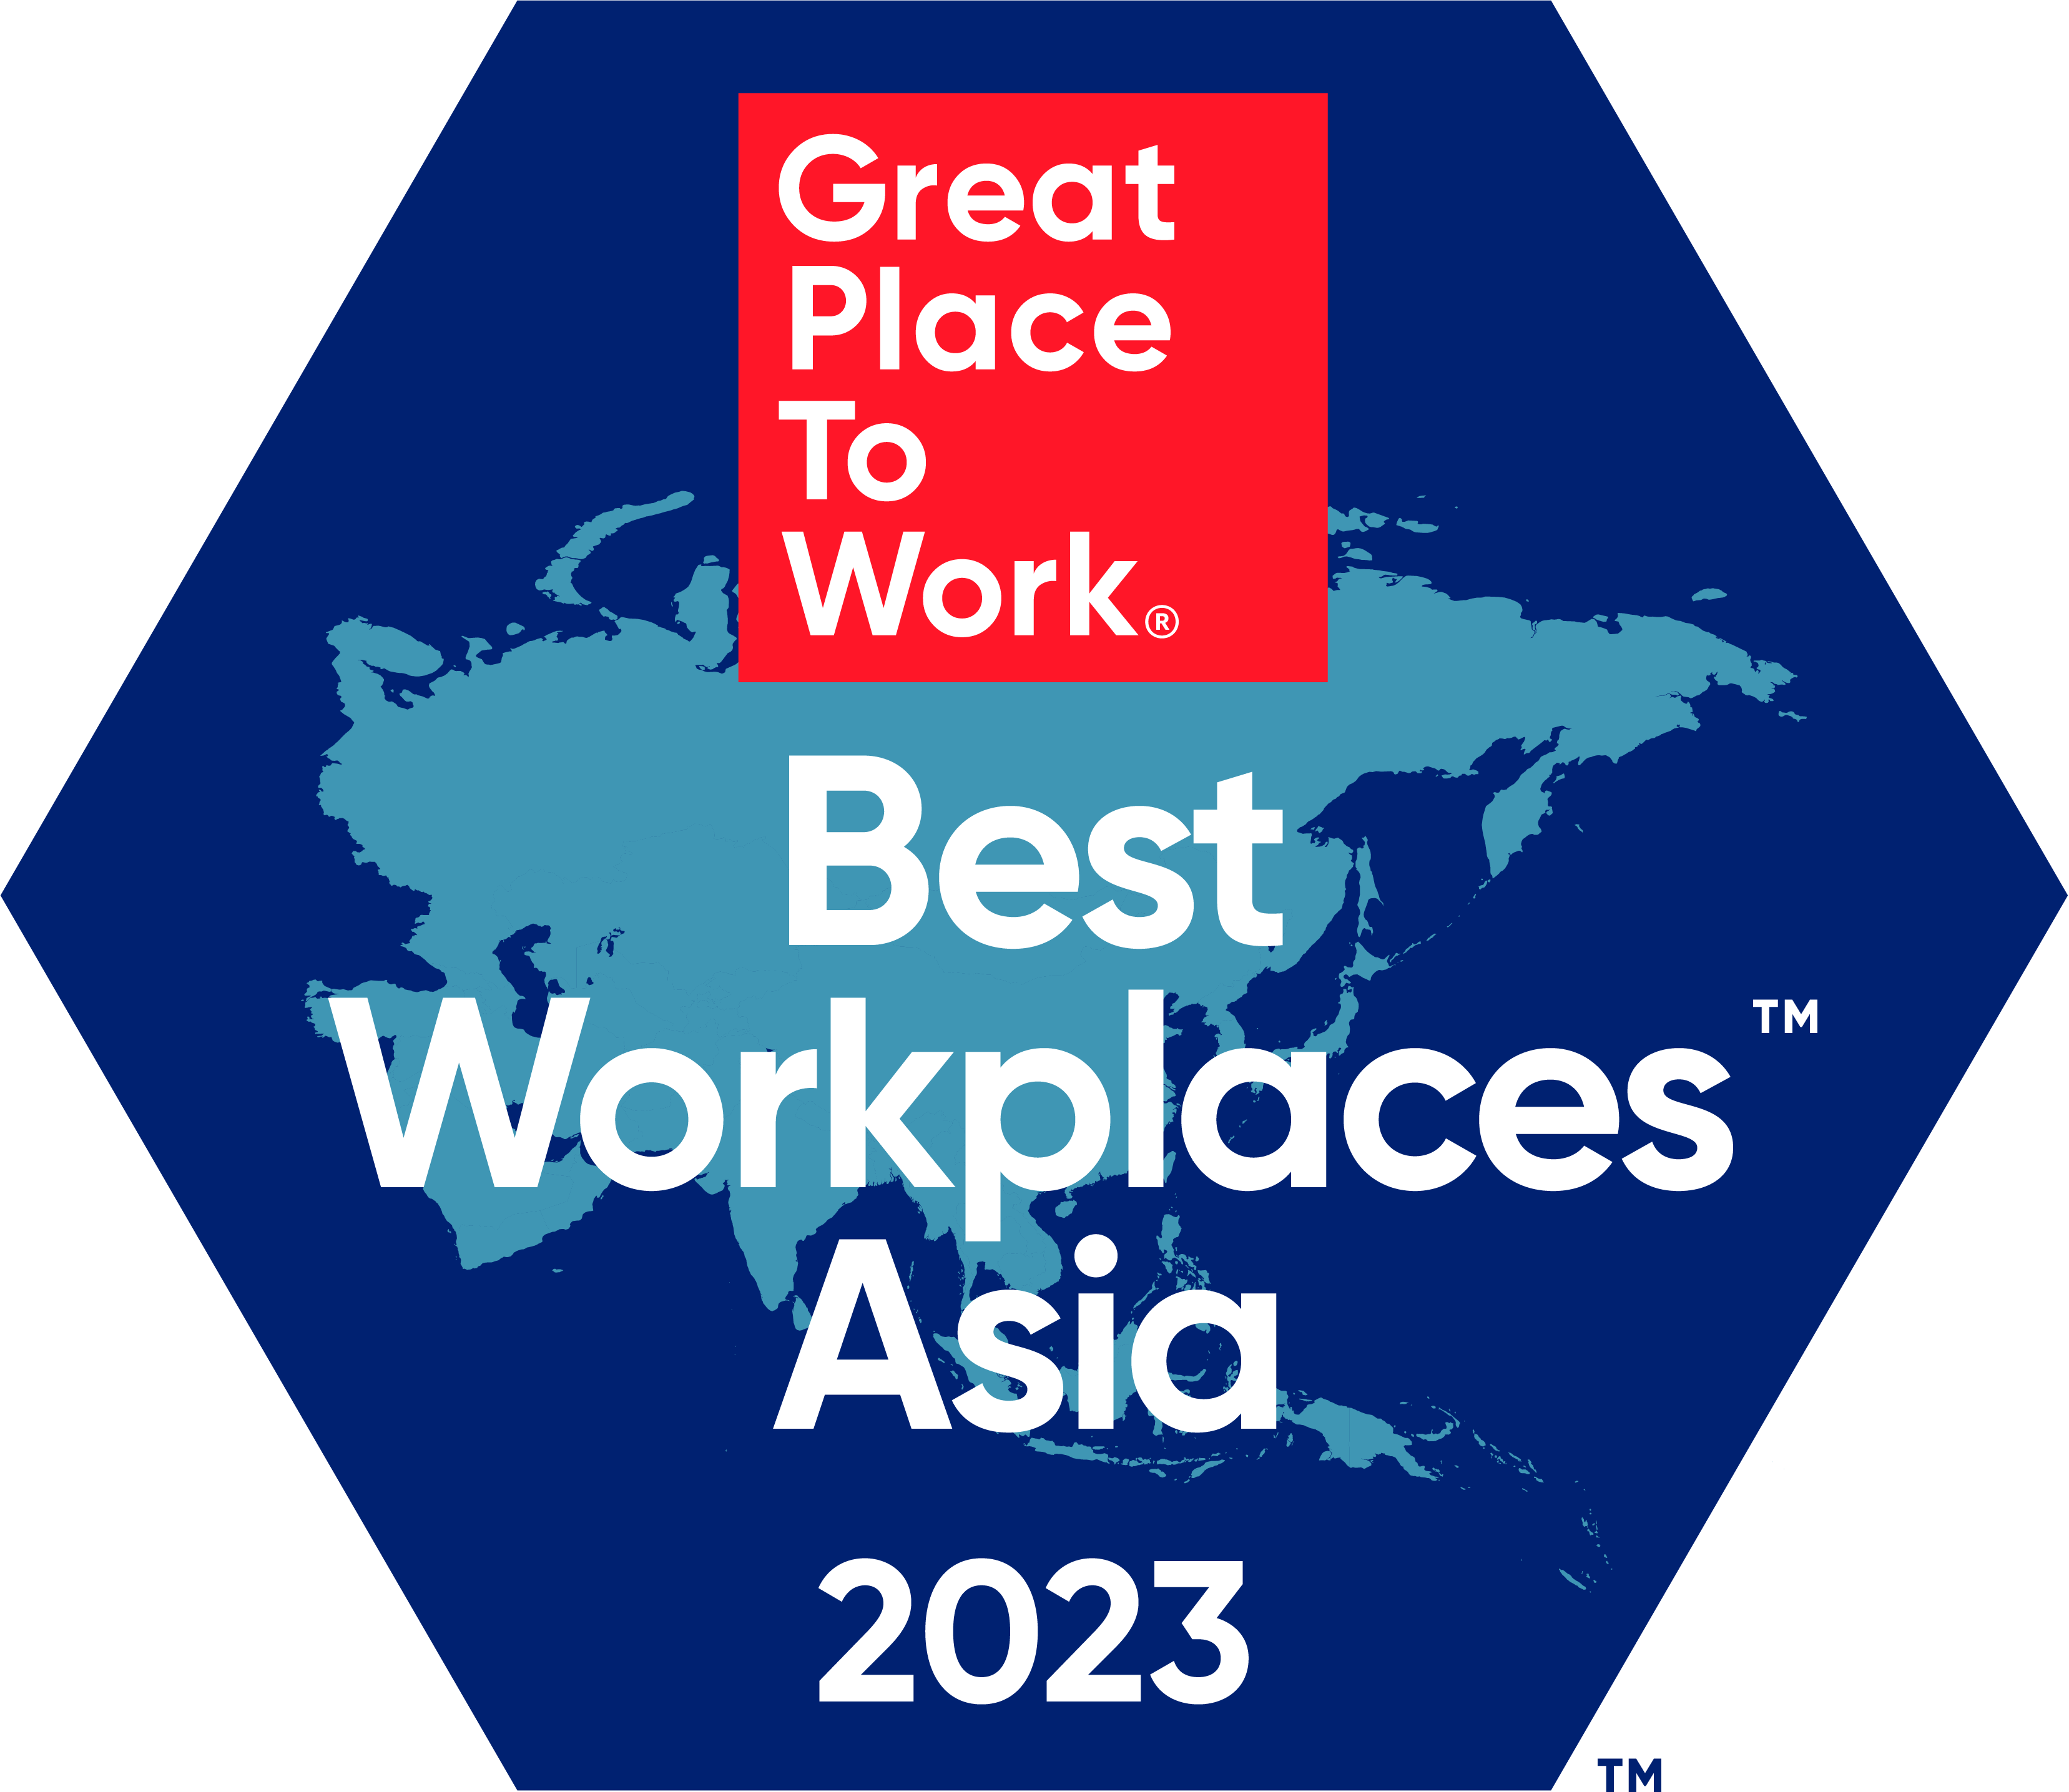 Cheops again awarded as “Great Place to Work”